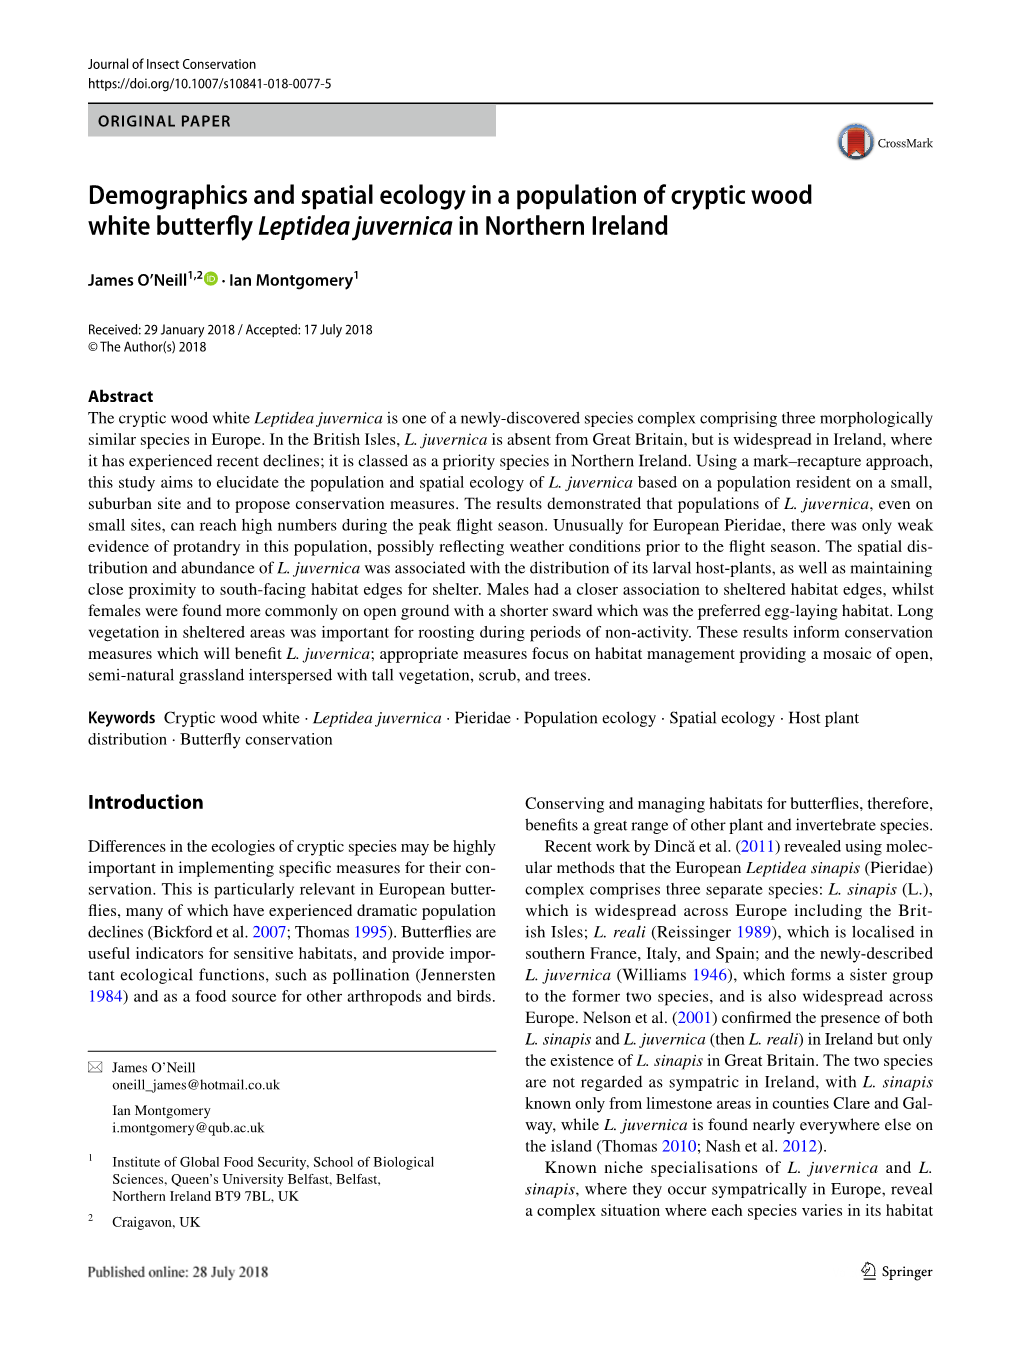 Demographics and Spatial Ecology in a Population of Cryptic Wood White Butterfly Leptidea Juvernica in Northern Ireland